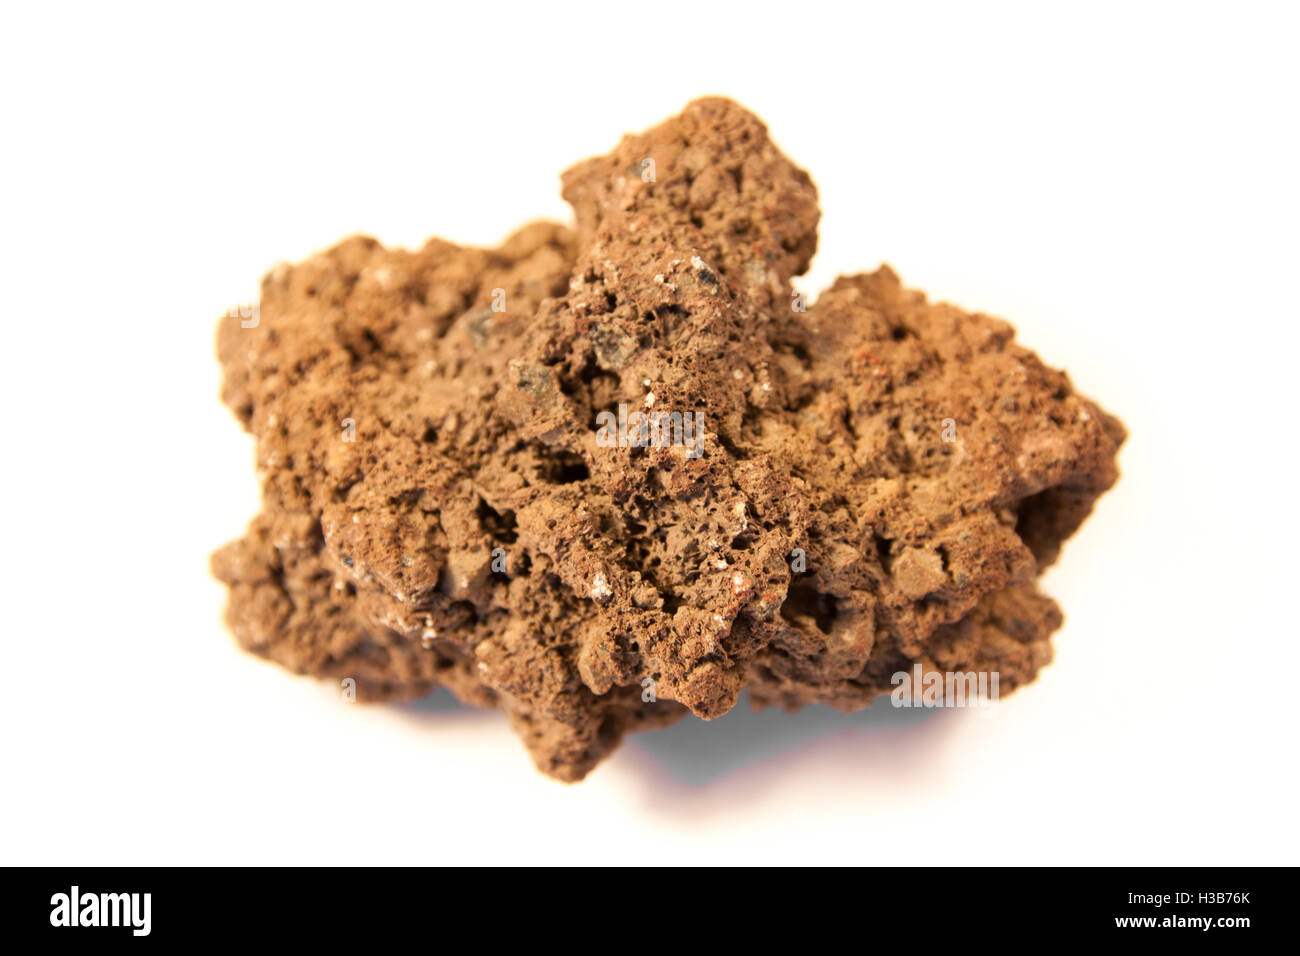 macro shot of a fine grained, extremely vesicular volcanic rock called pumice Stock Photo